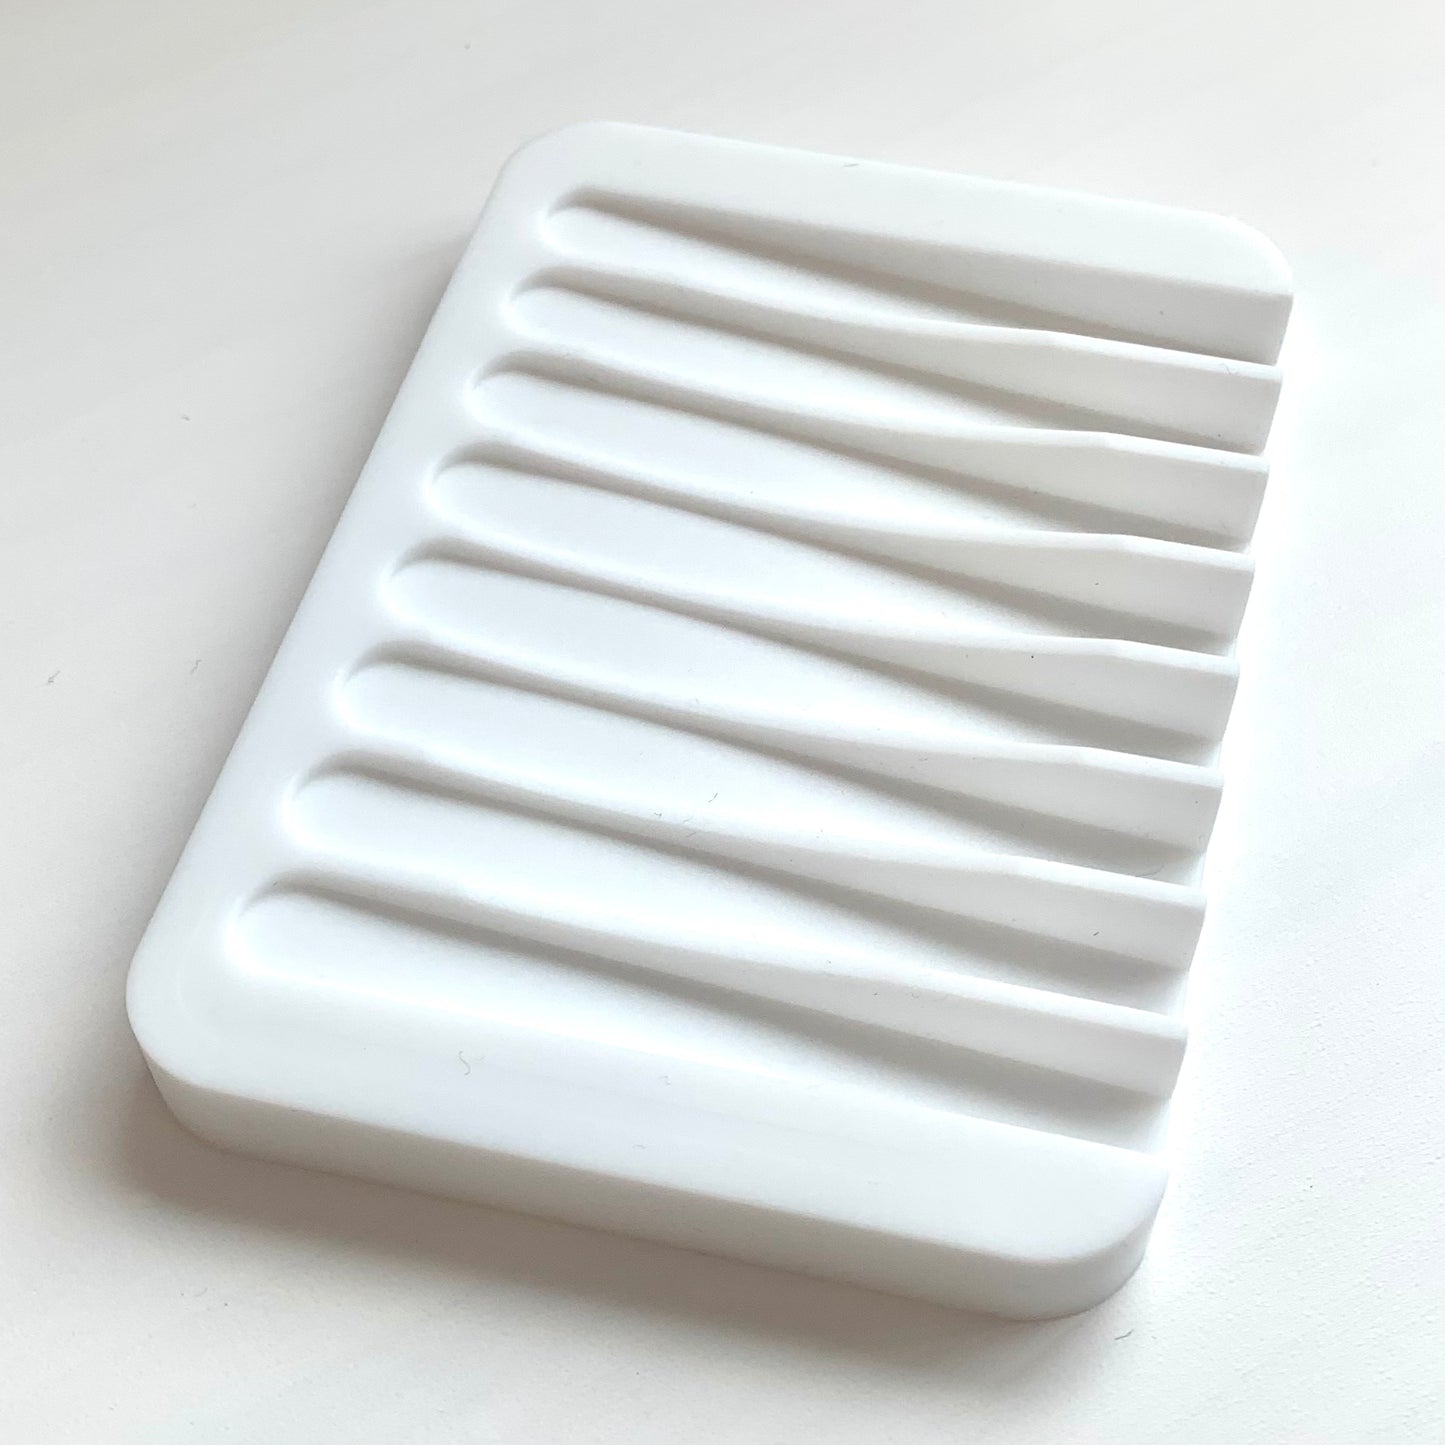 Silicone Waterfall Self-Draining Soap Dish - White